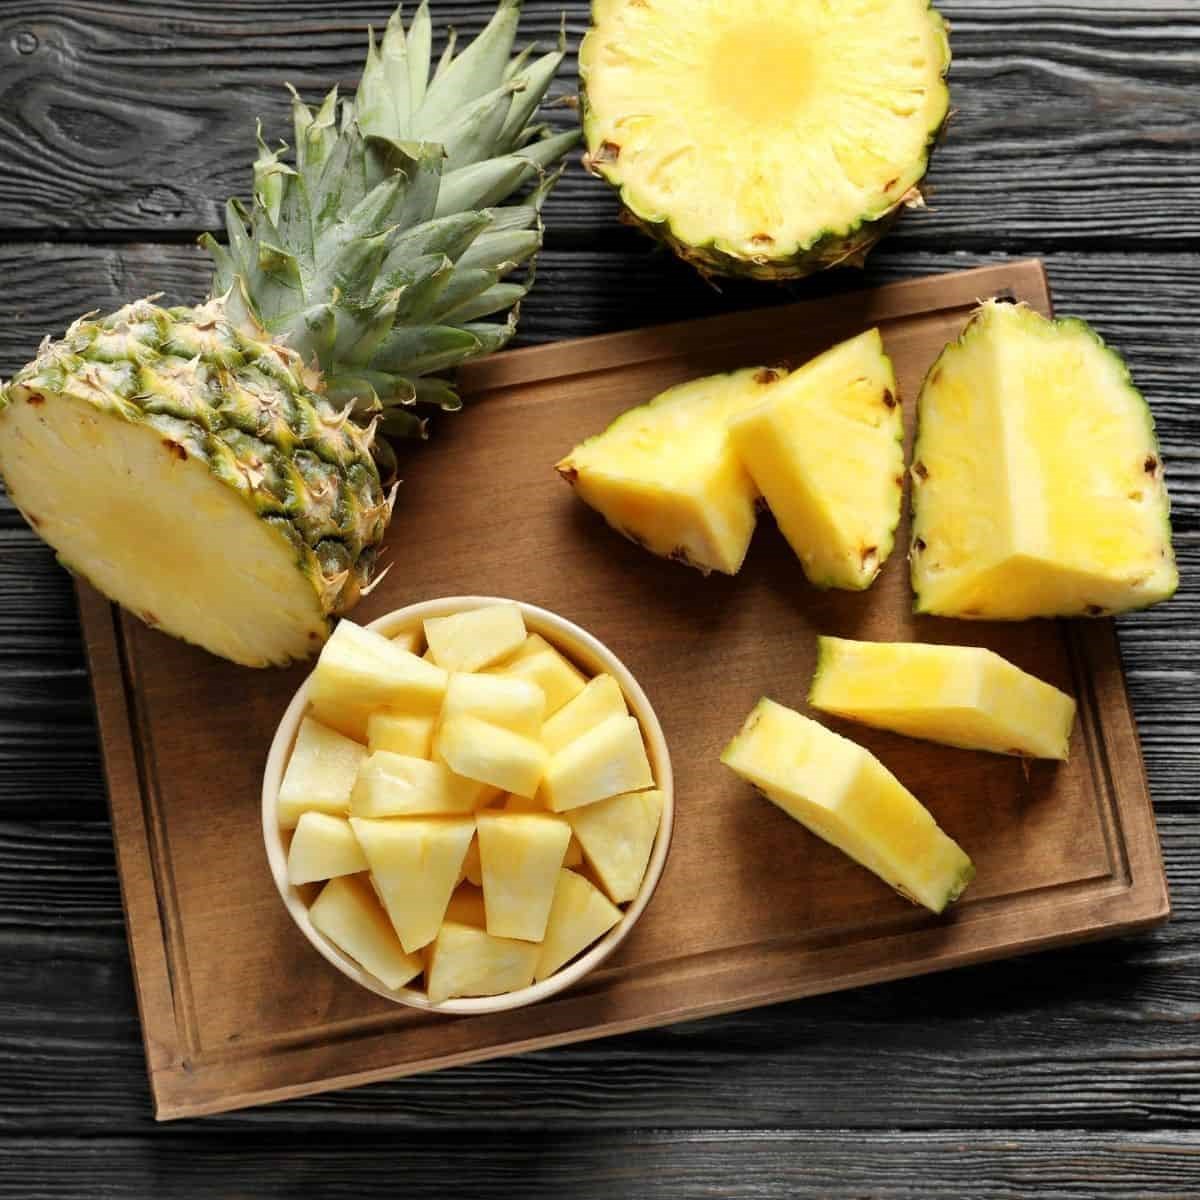 How To Store Fresh Cut Pineapple